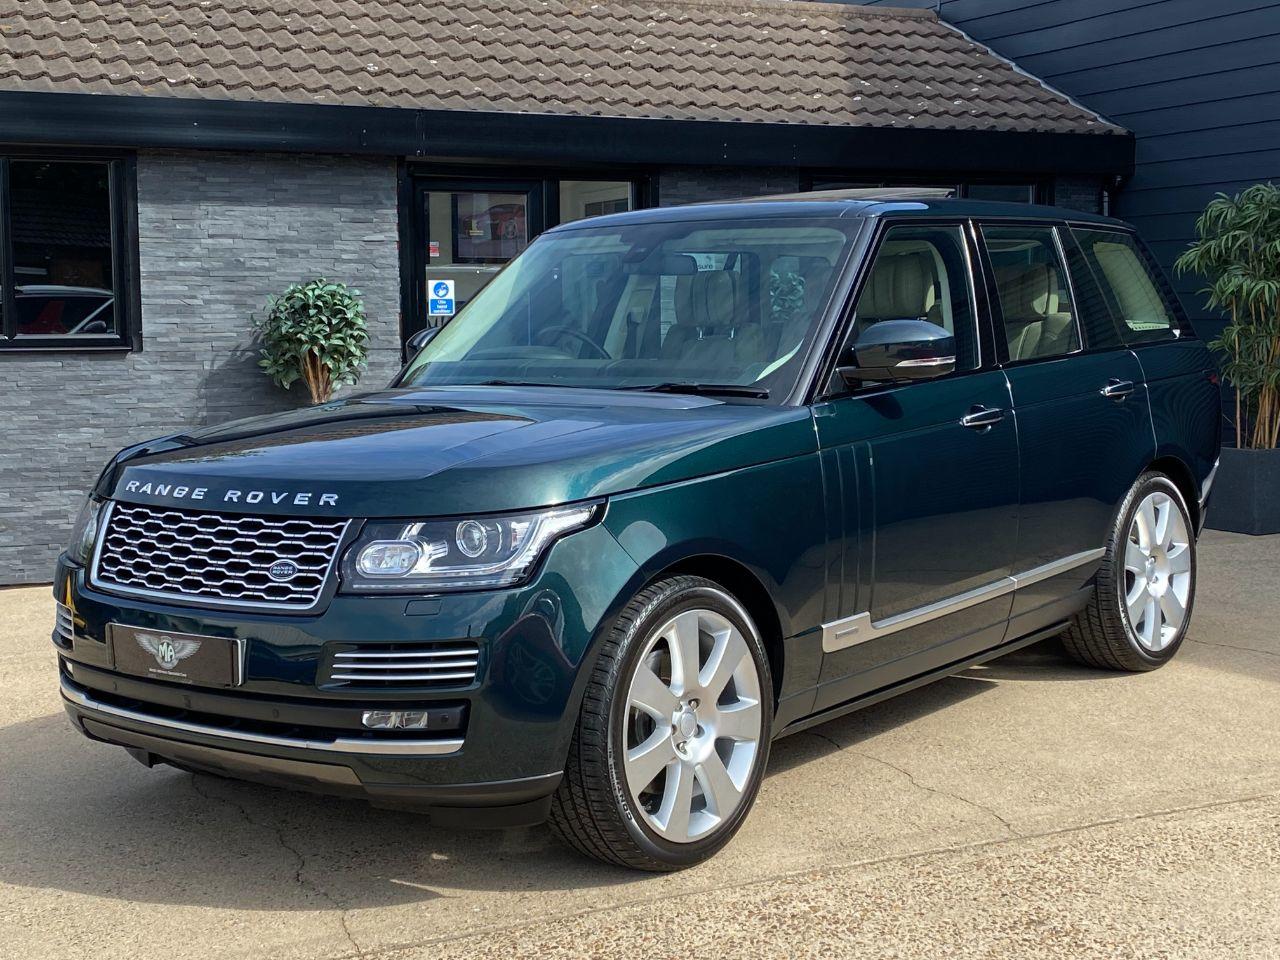 Land Rover Range Rover 5.0 V8 Supercharged Autobiography 4dr Auto Estate Petrol Aintree Green Metallic